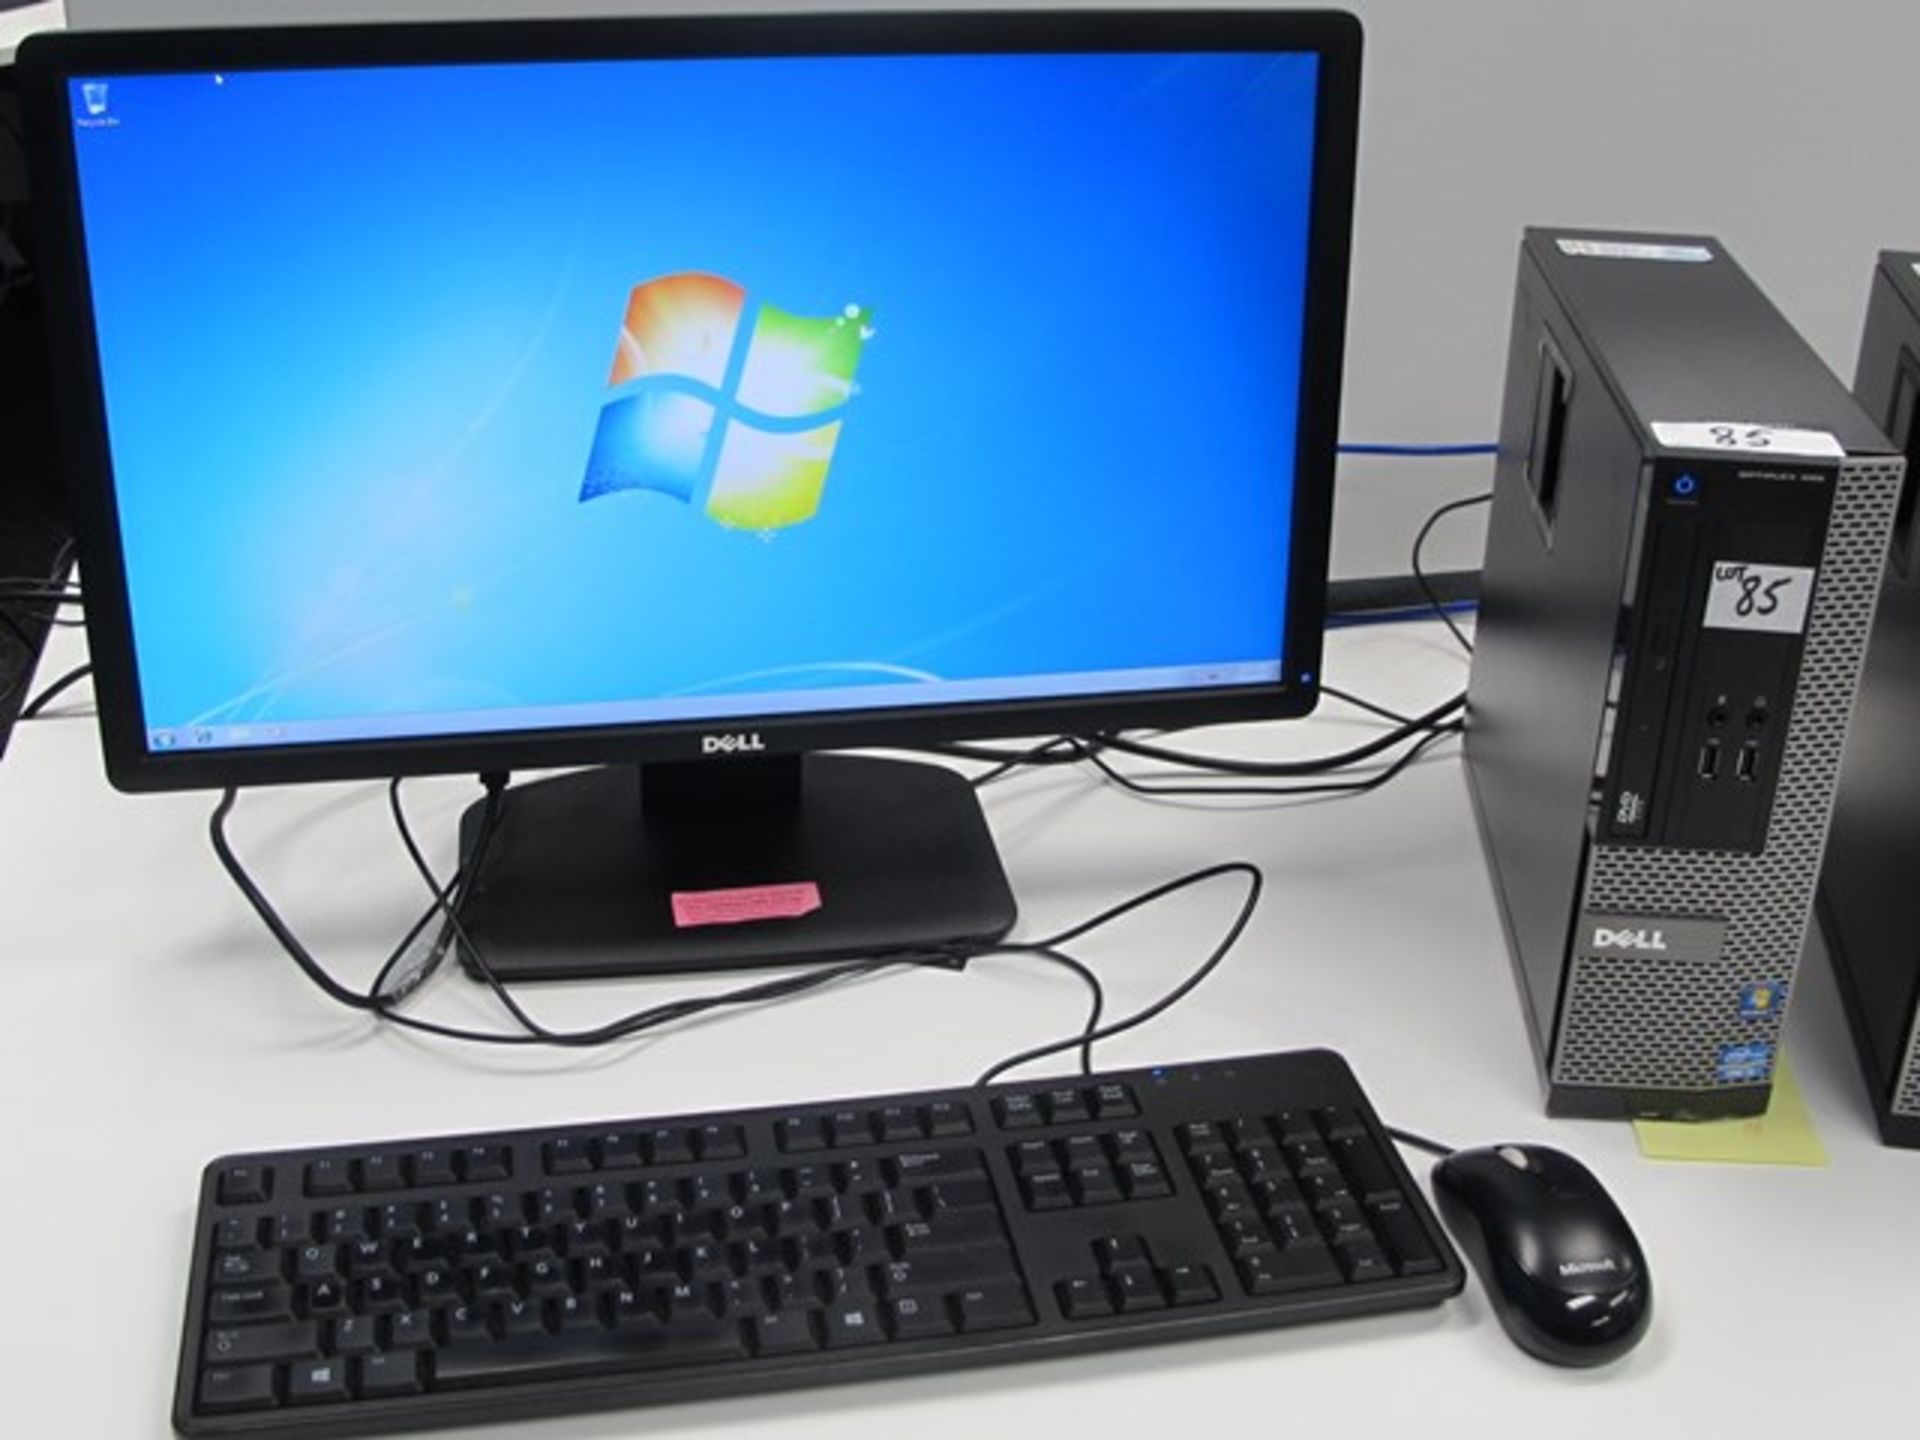 DELL OPTIPLEX 390 i3 TOWER COMPUTER W/ MONITOR, KEYBOARD, MOUSE (WINDOWS 7)